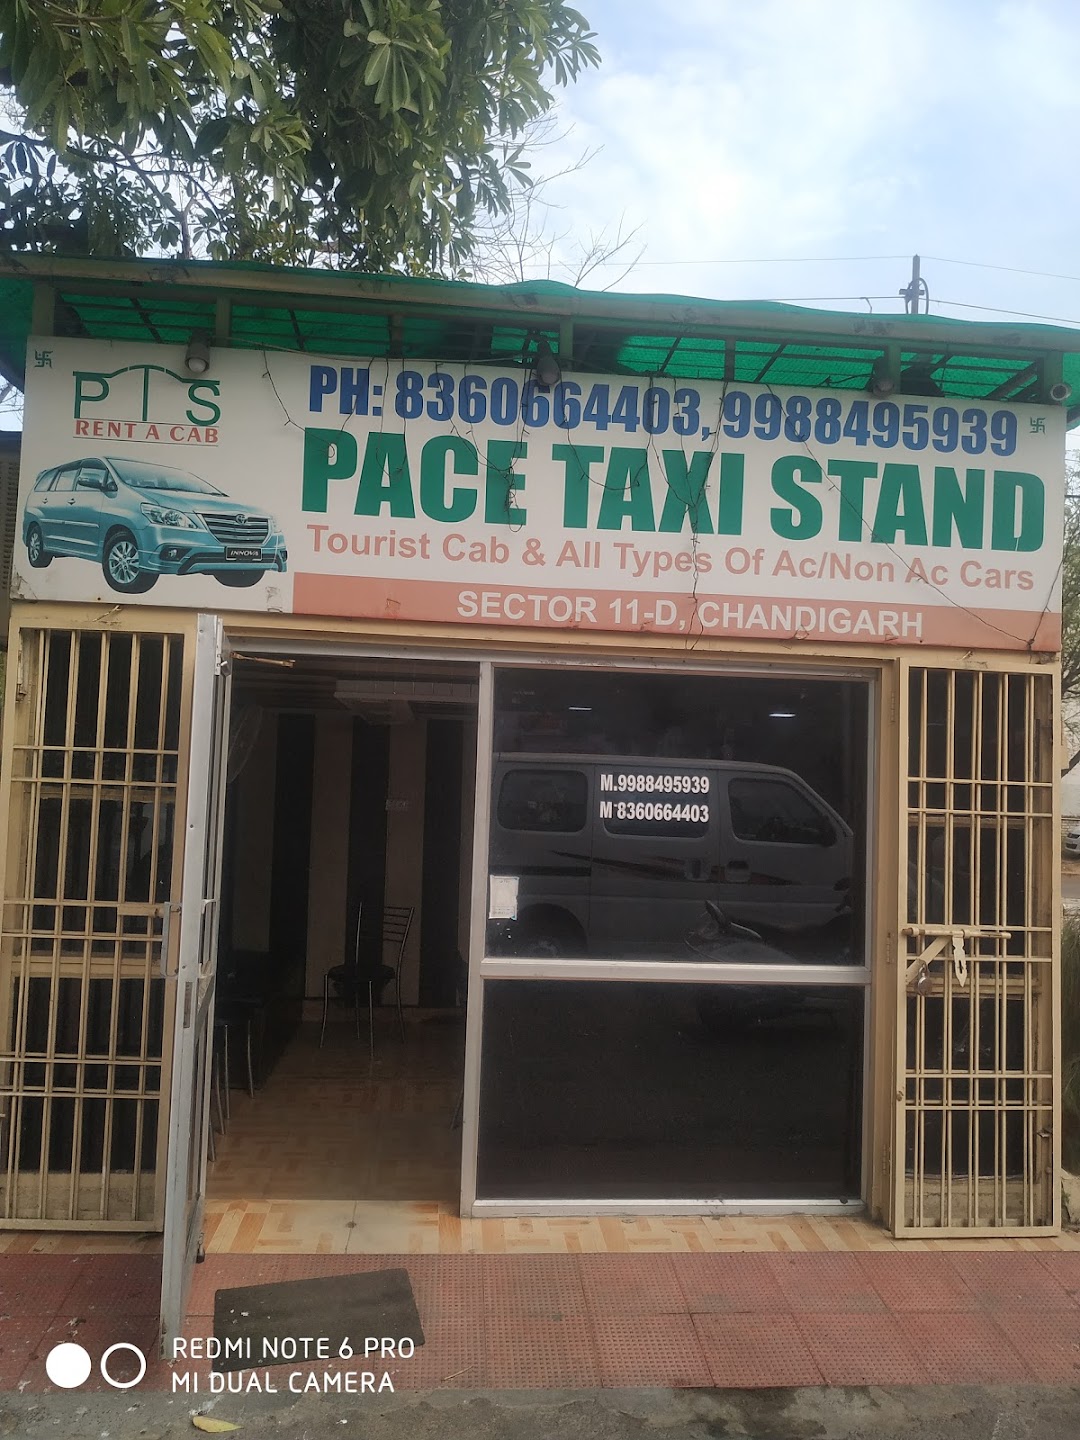 Pace Taxi Stand